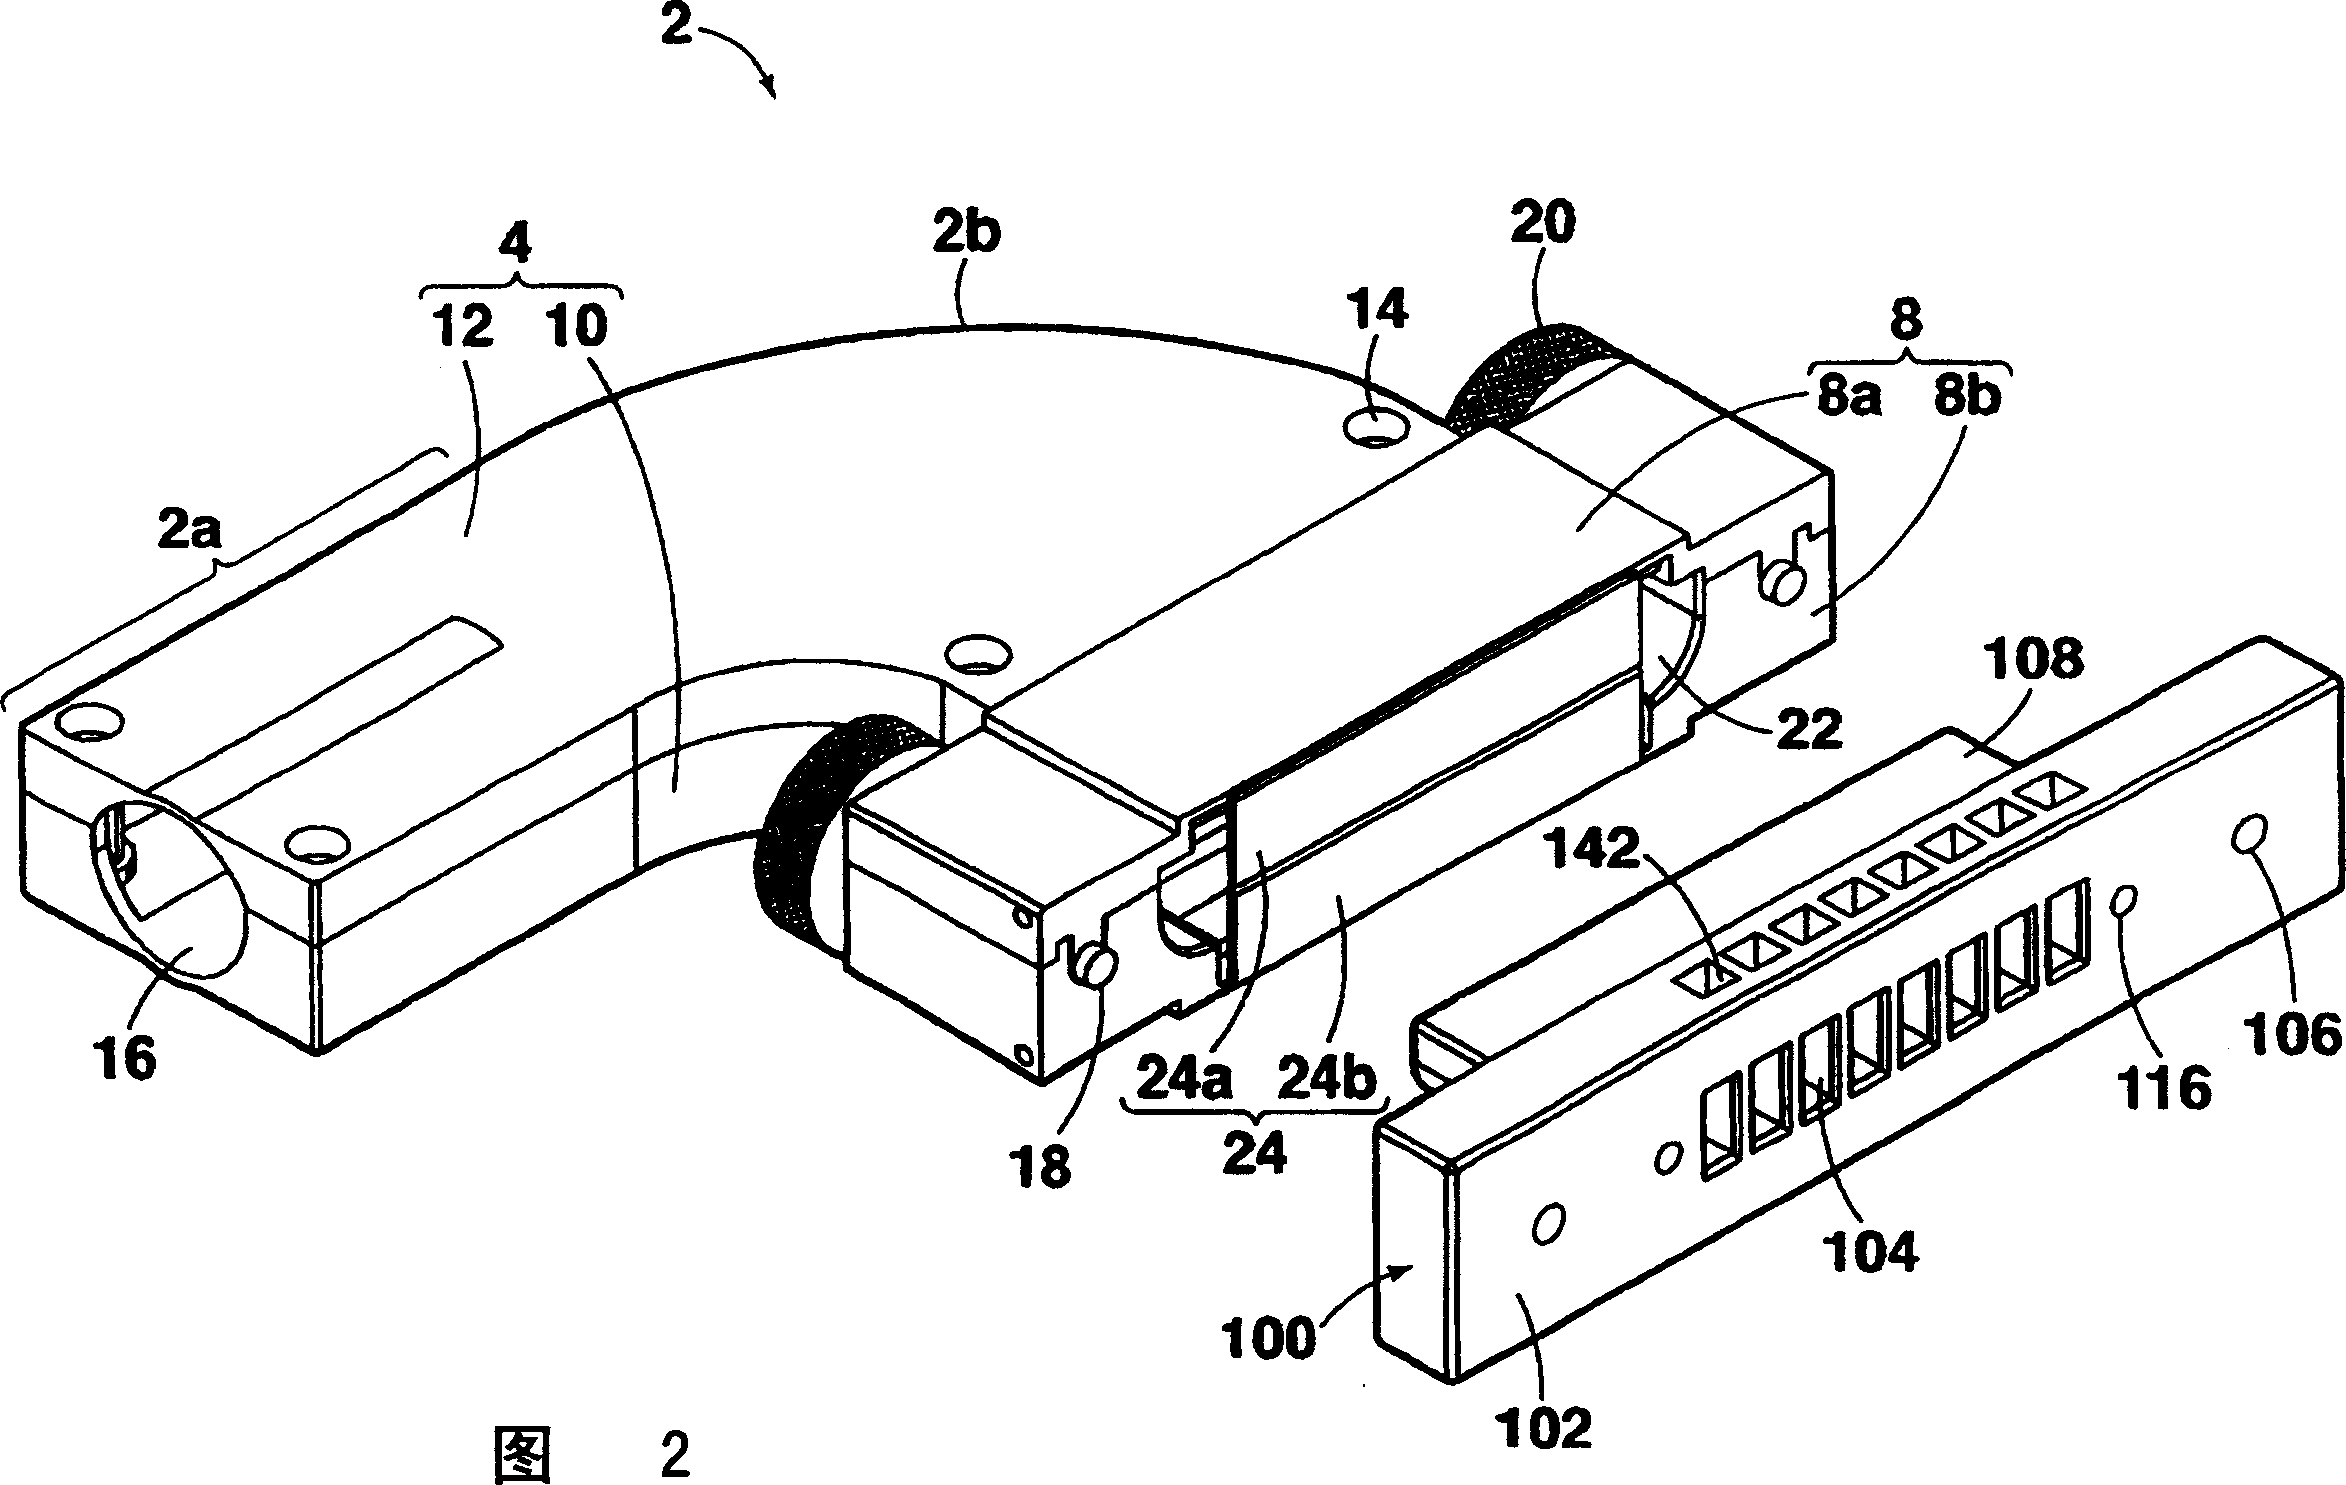 Multi- core optical connector assembly